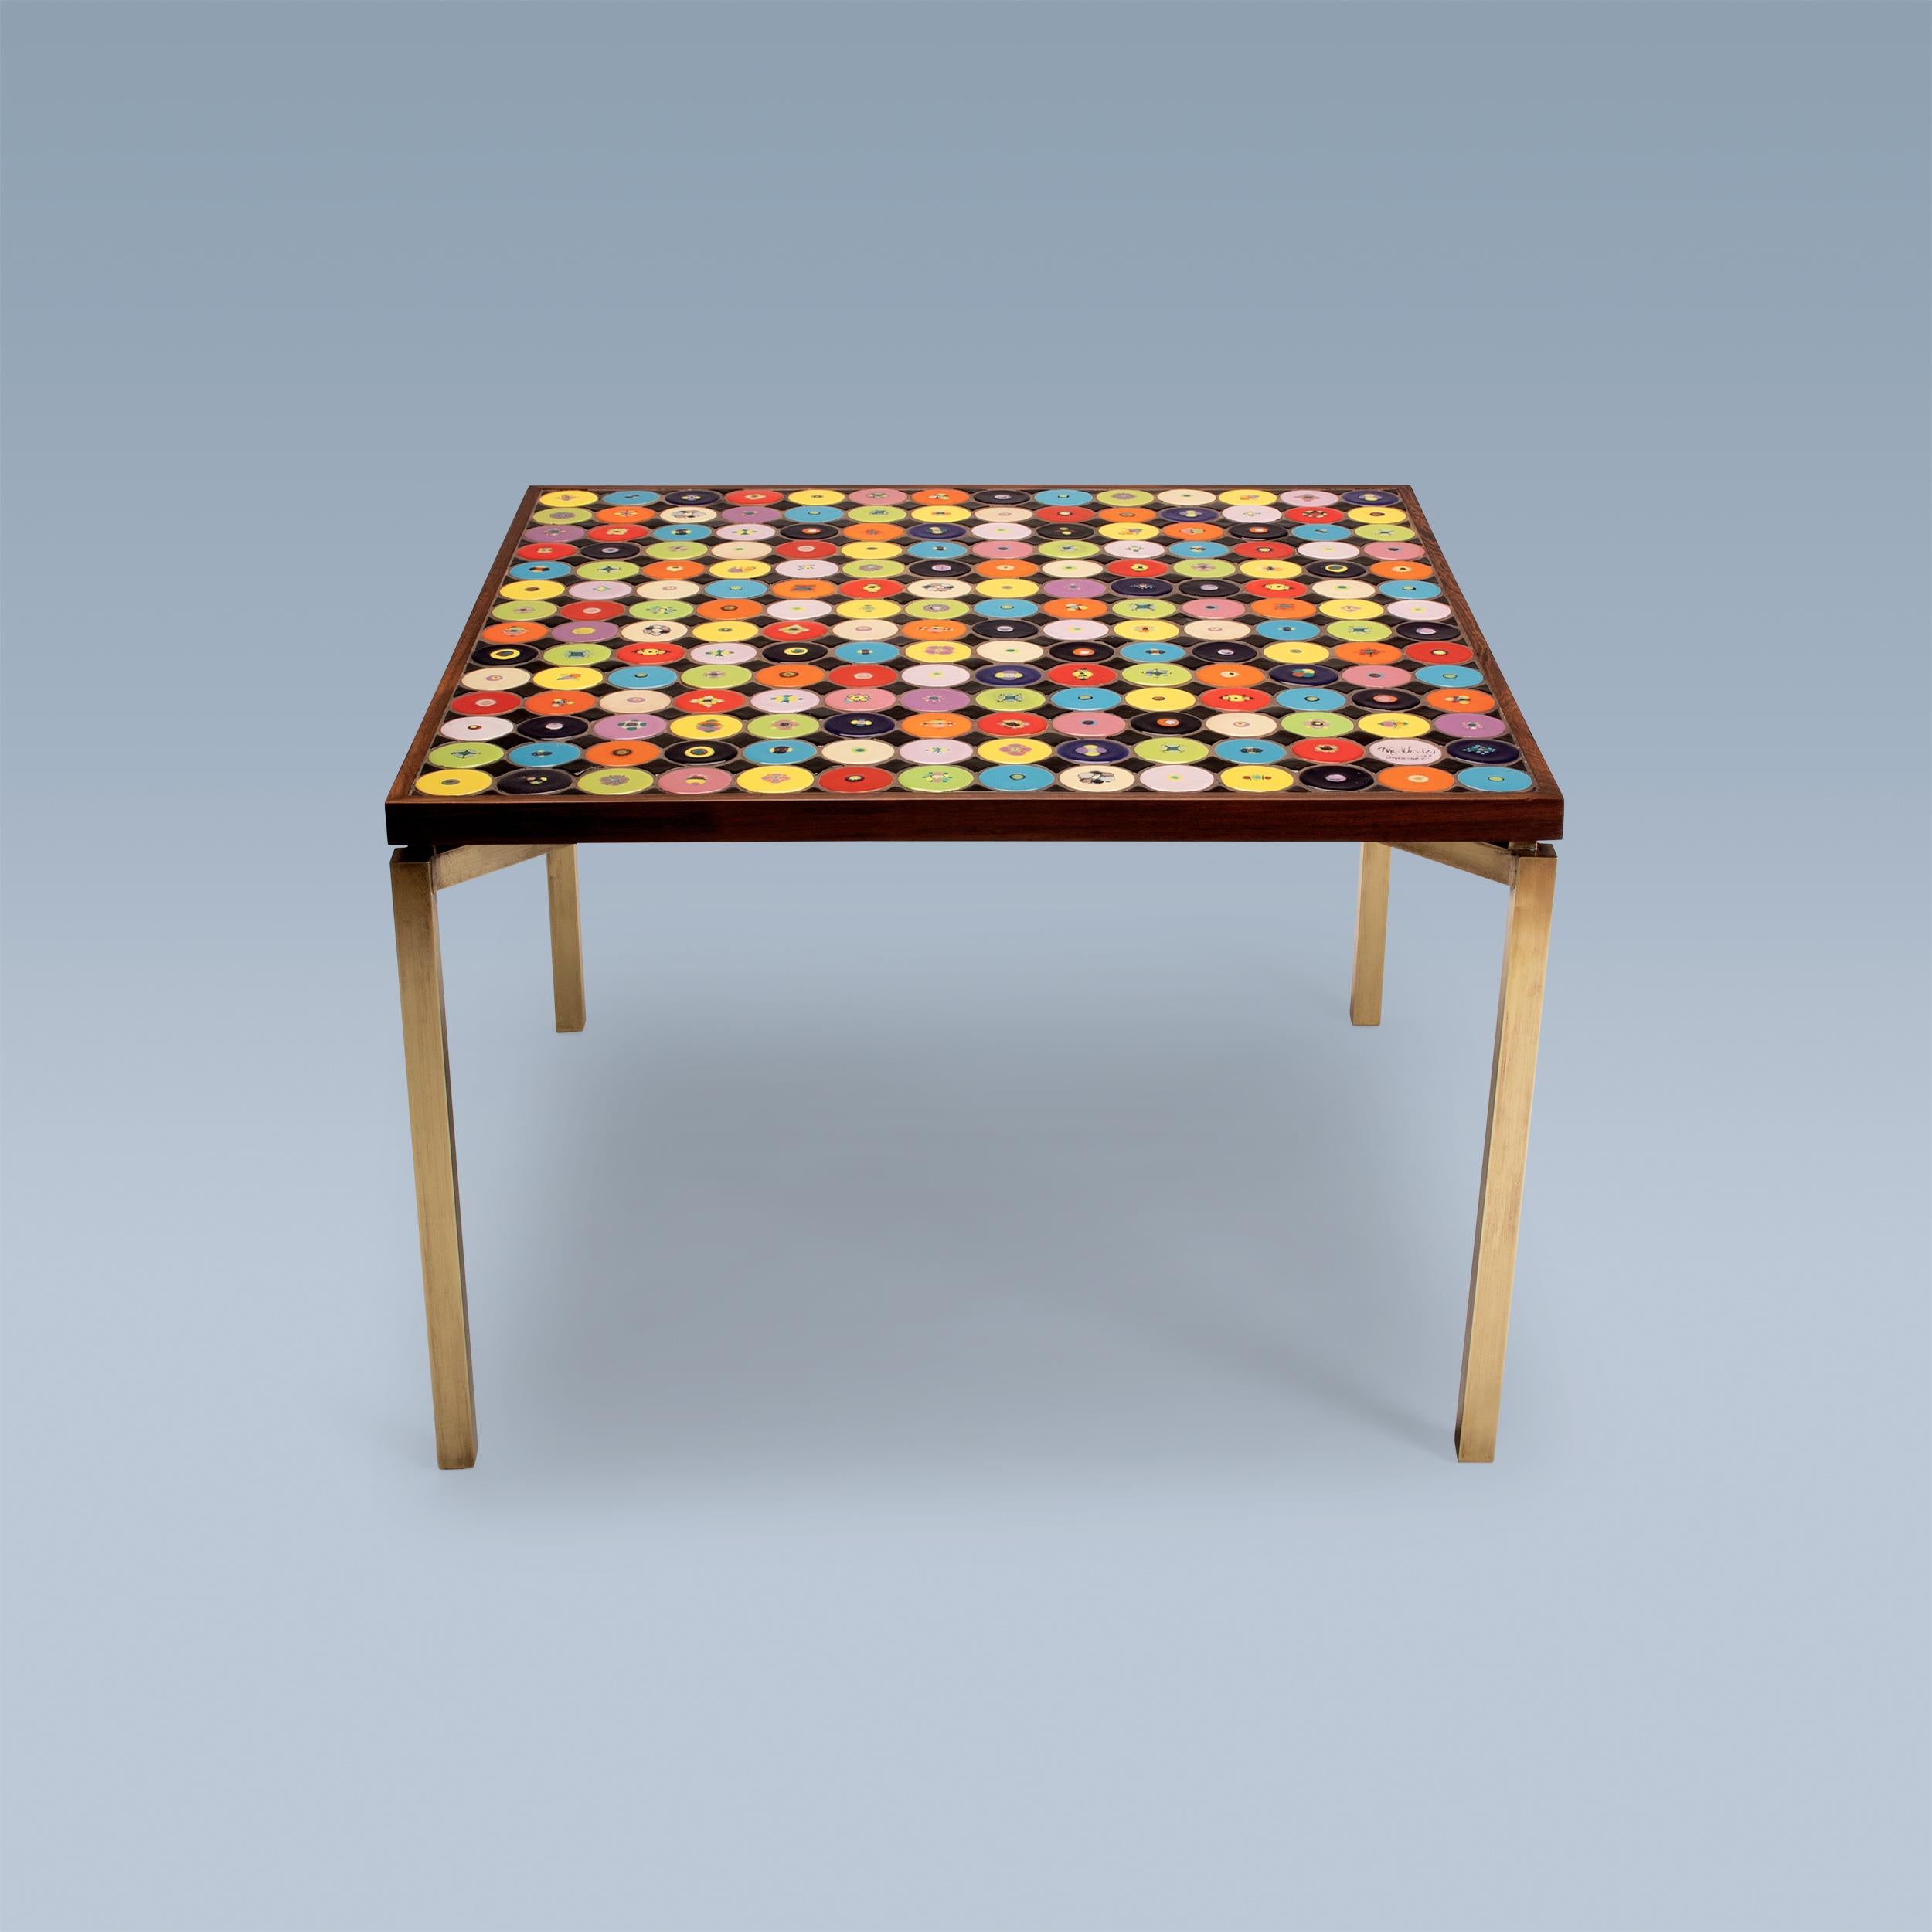 Scandinavian Modern Danish modern coffee table with red, yellow, green, blue tiles and brass legs For Sale